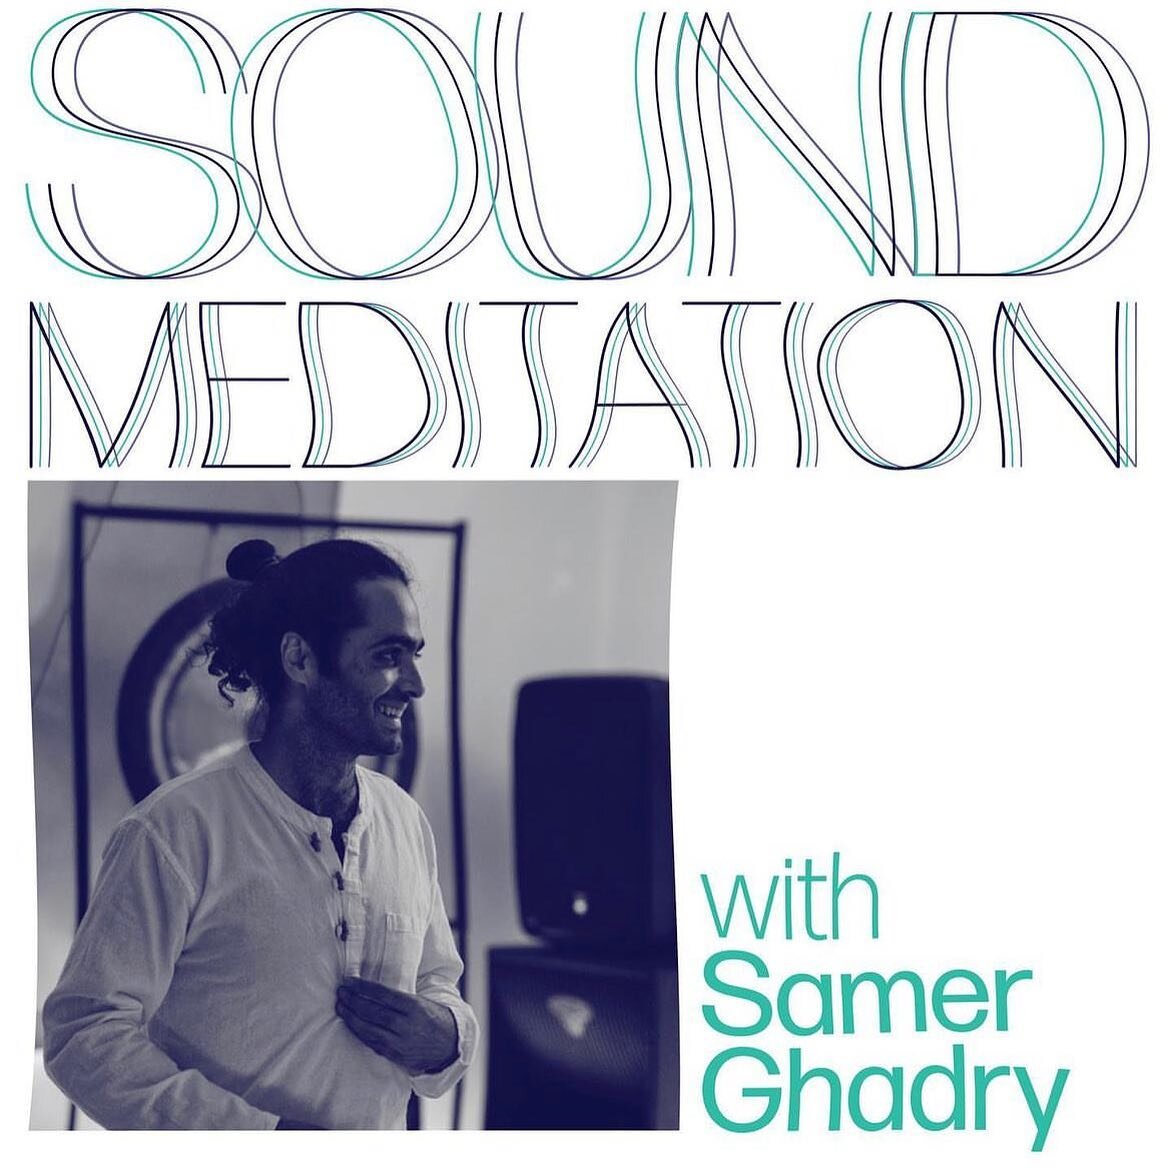 Join us for a Sound Meditation with Samer Ghadry on Friday, May 19th, from 7:30-9pm. @tone_center is a skilled sound healer who uses a variety of instruments and his voice to create a soothing and immersive meditative experience. 
.
During the sessio